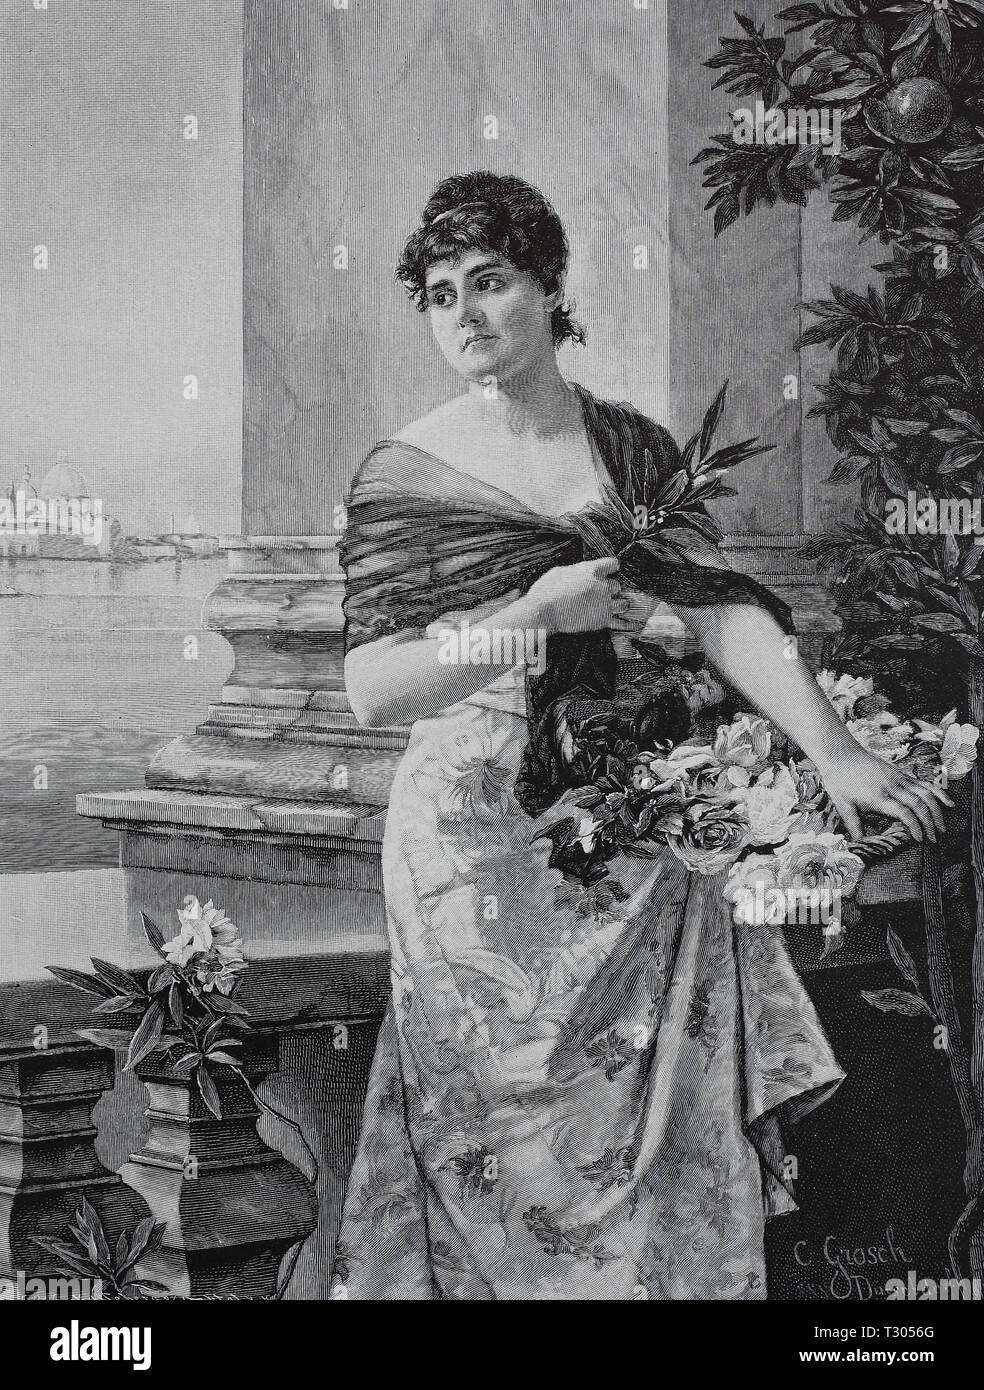 Digital improved reproduction, Venetianerin, woman from Venice with a basket with flowers in the lagoon town, Frau aus Venedig mit einem Korb mit Blumen in der Lagunenstadt, from an original print from the 19th century Stock Photo